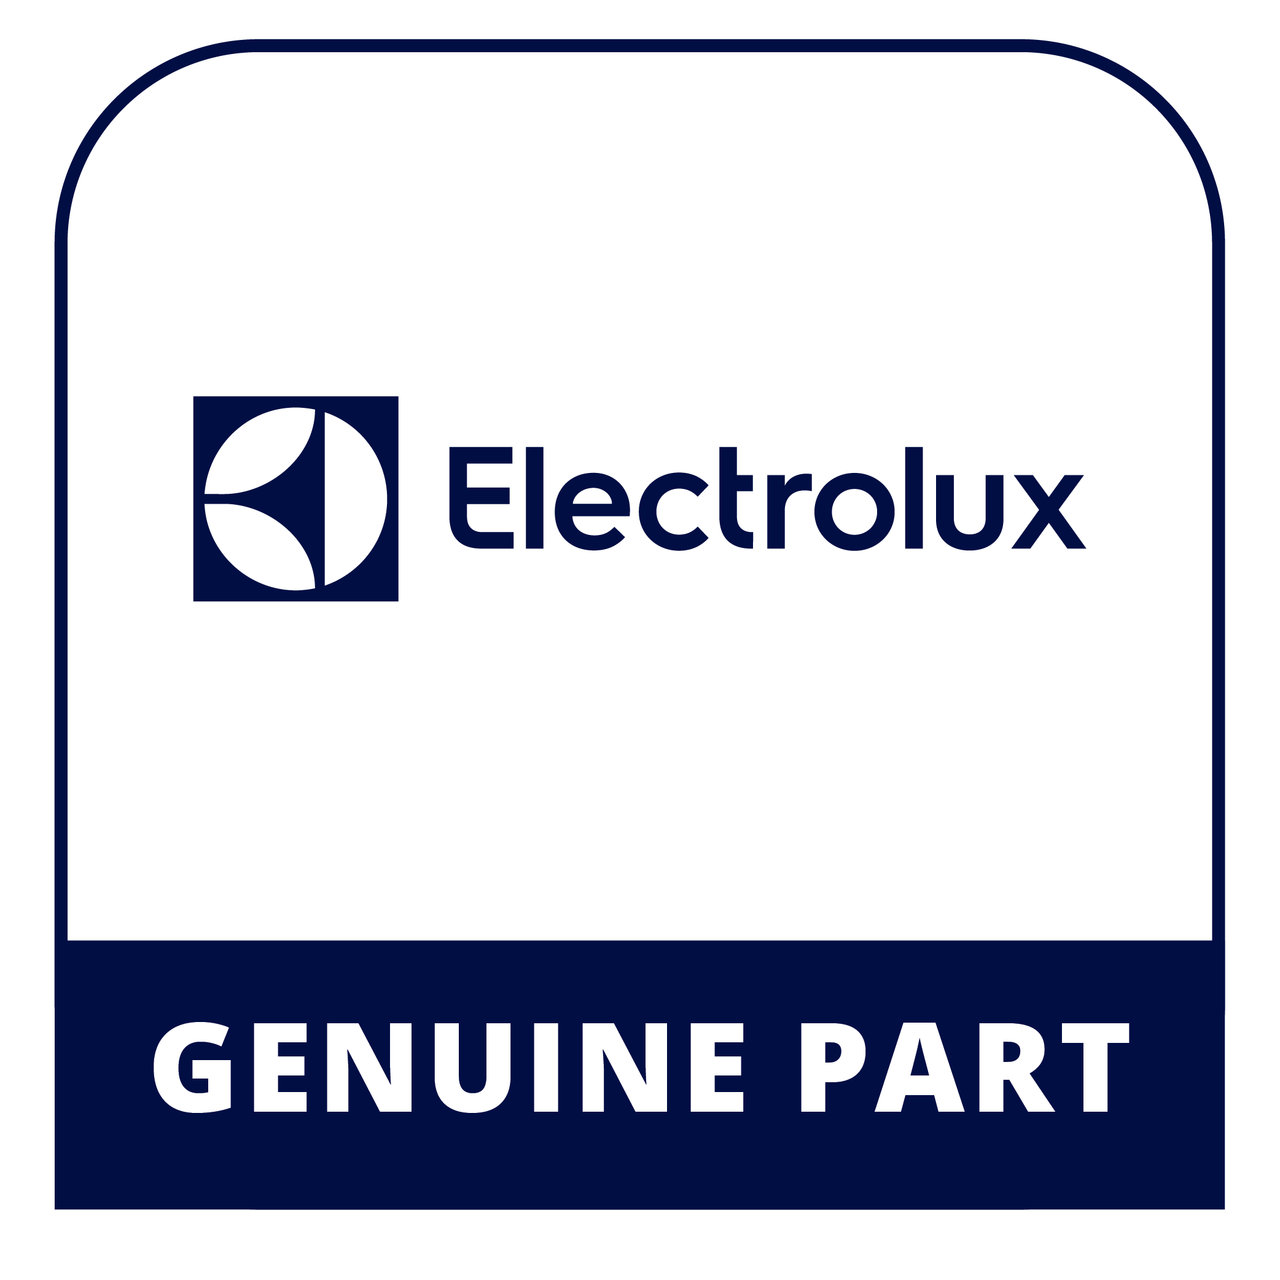 Frigidaire - Electrolux 316495105 Use & Care Guide - Genuine Electrolux Part